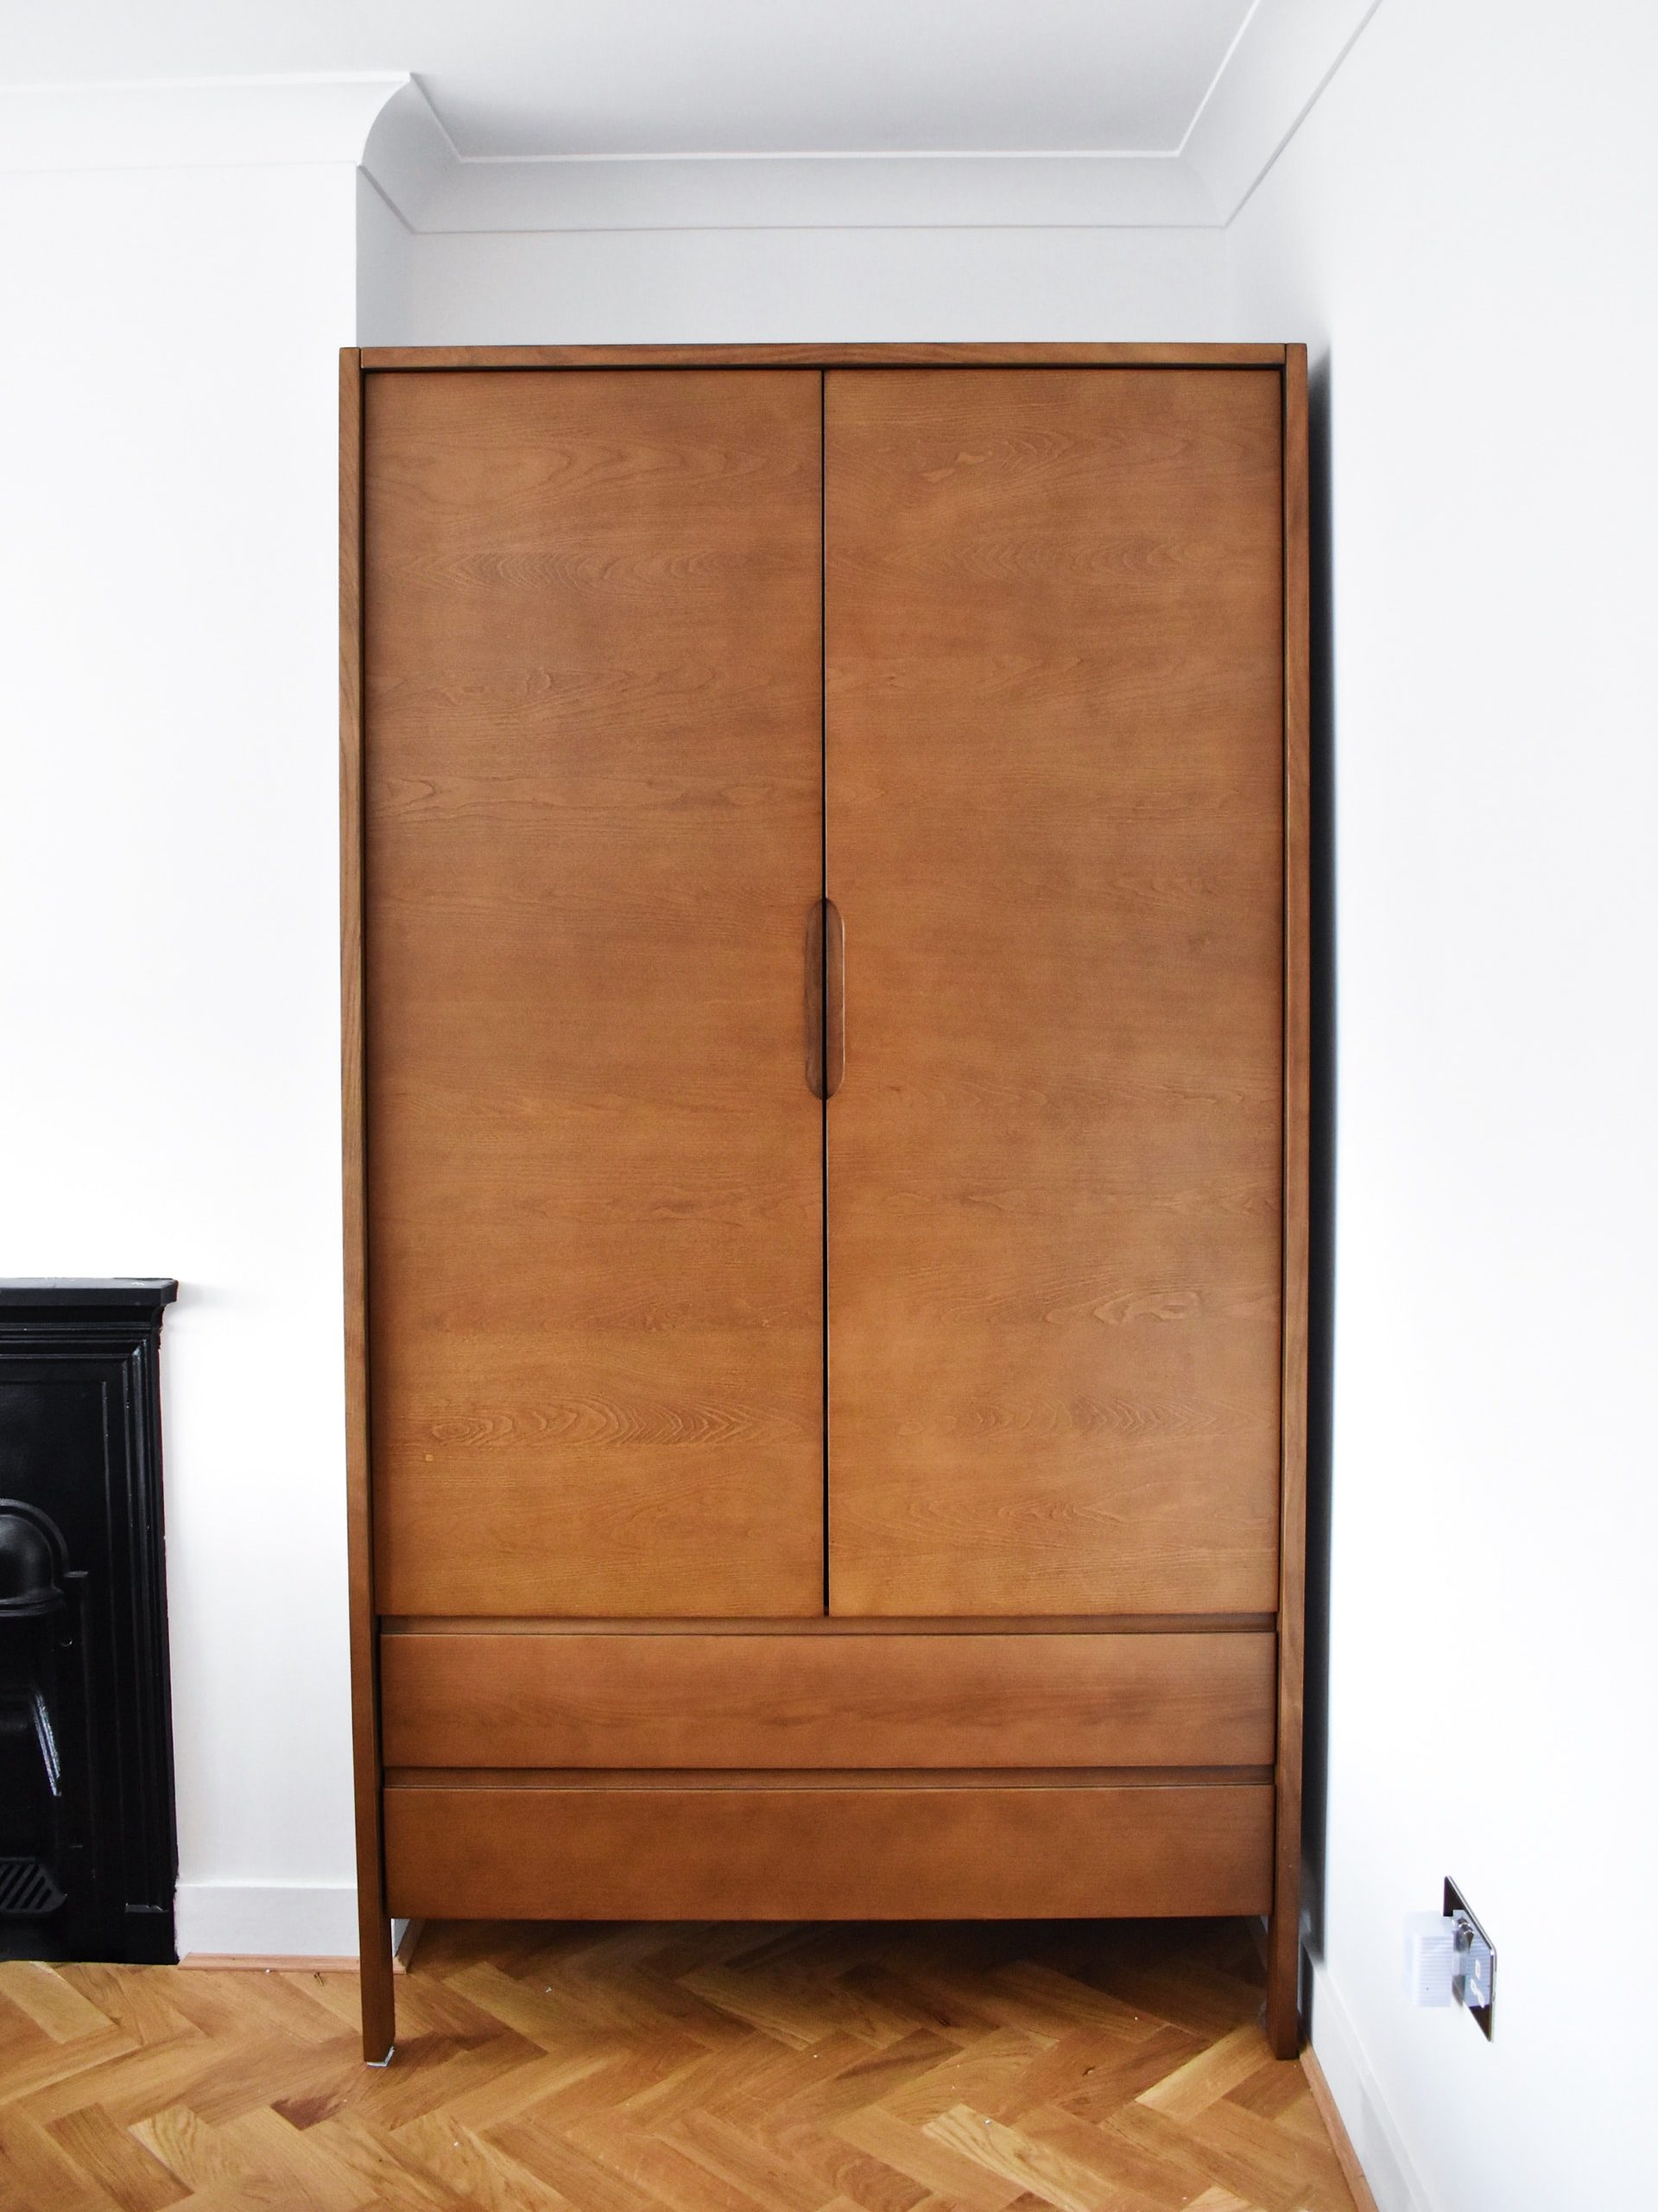 A brown wardrobe in a corner of a white room